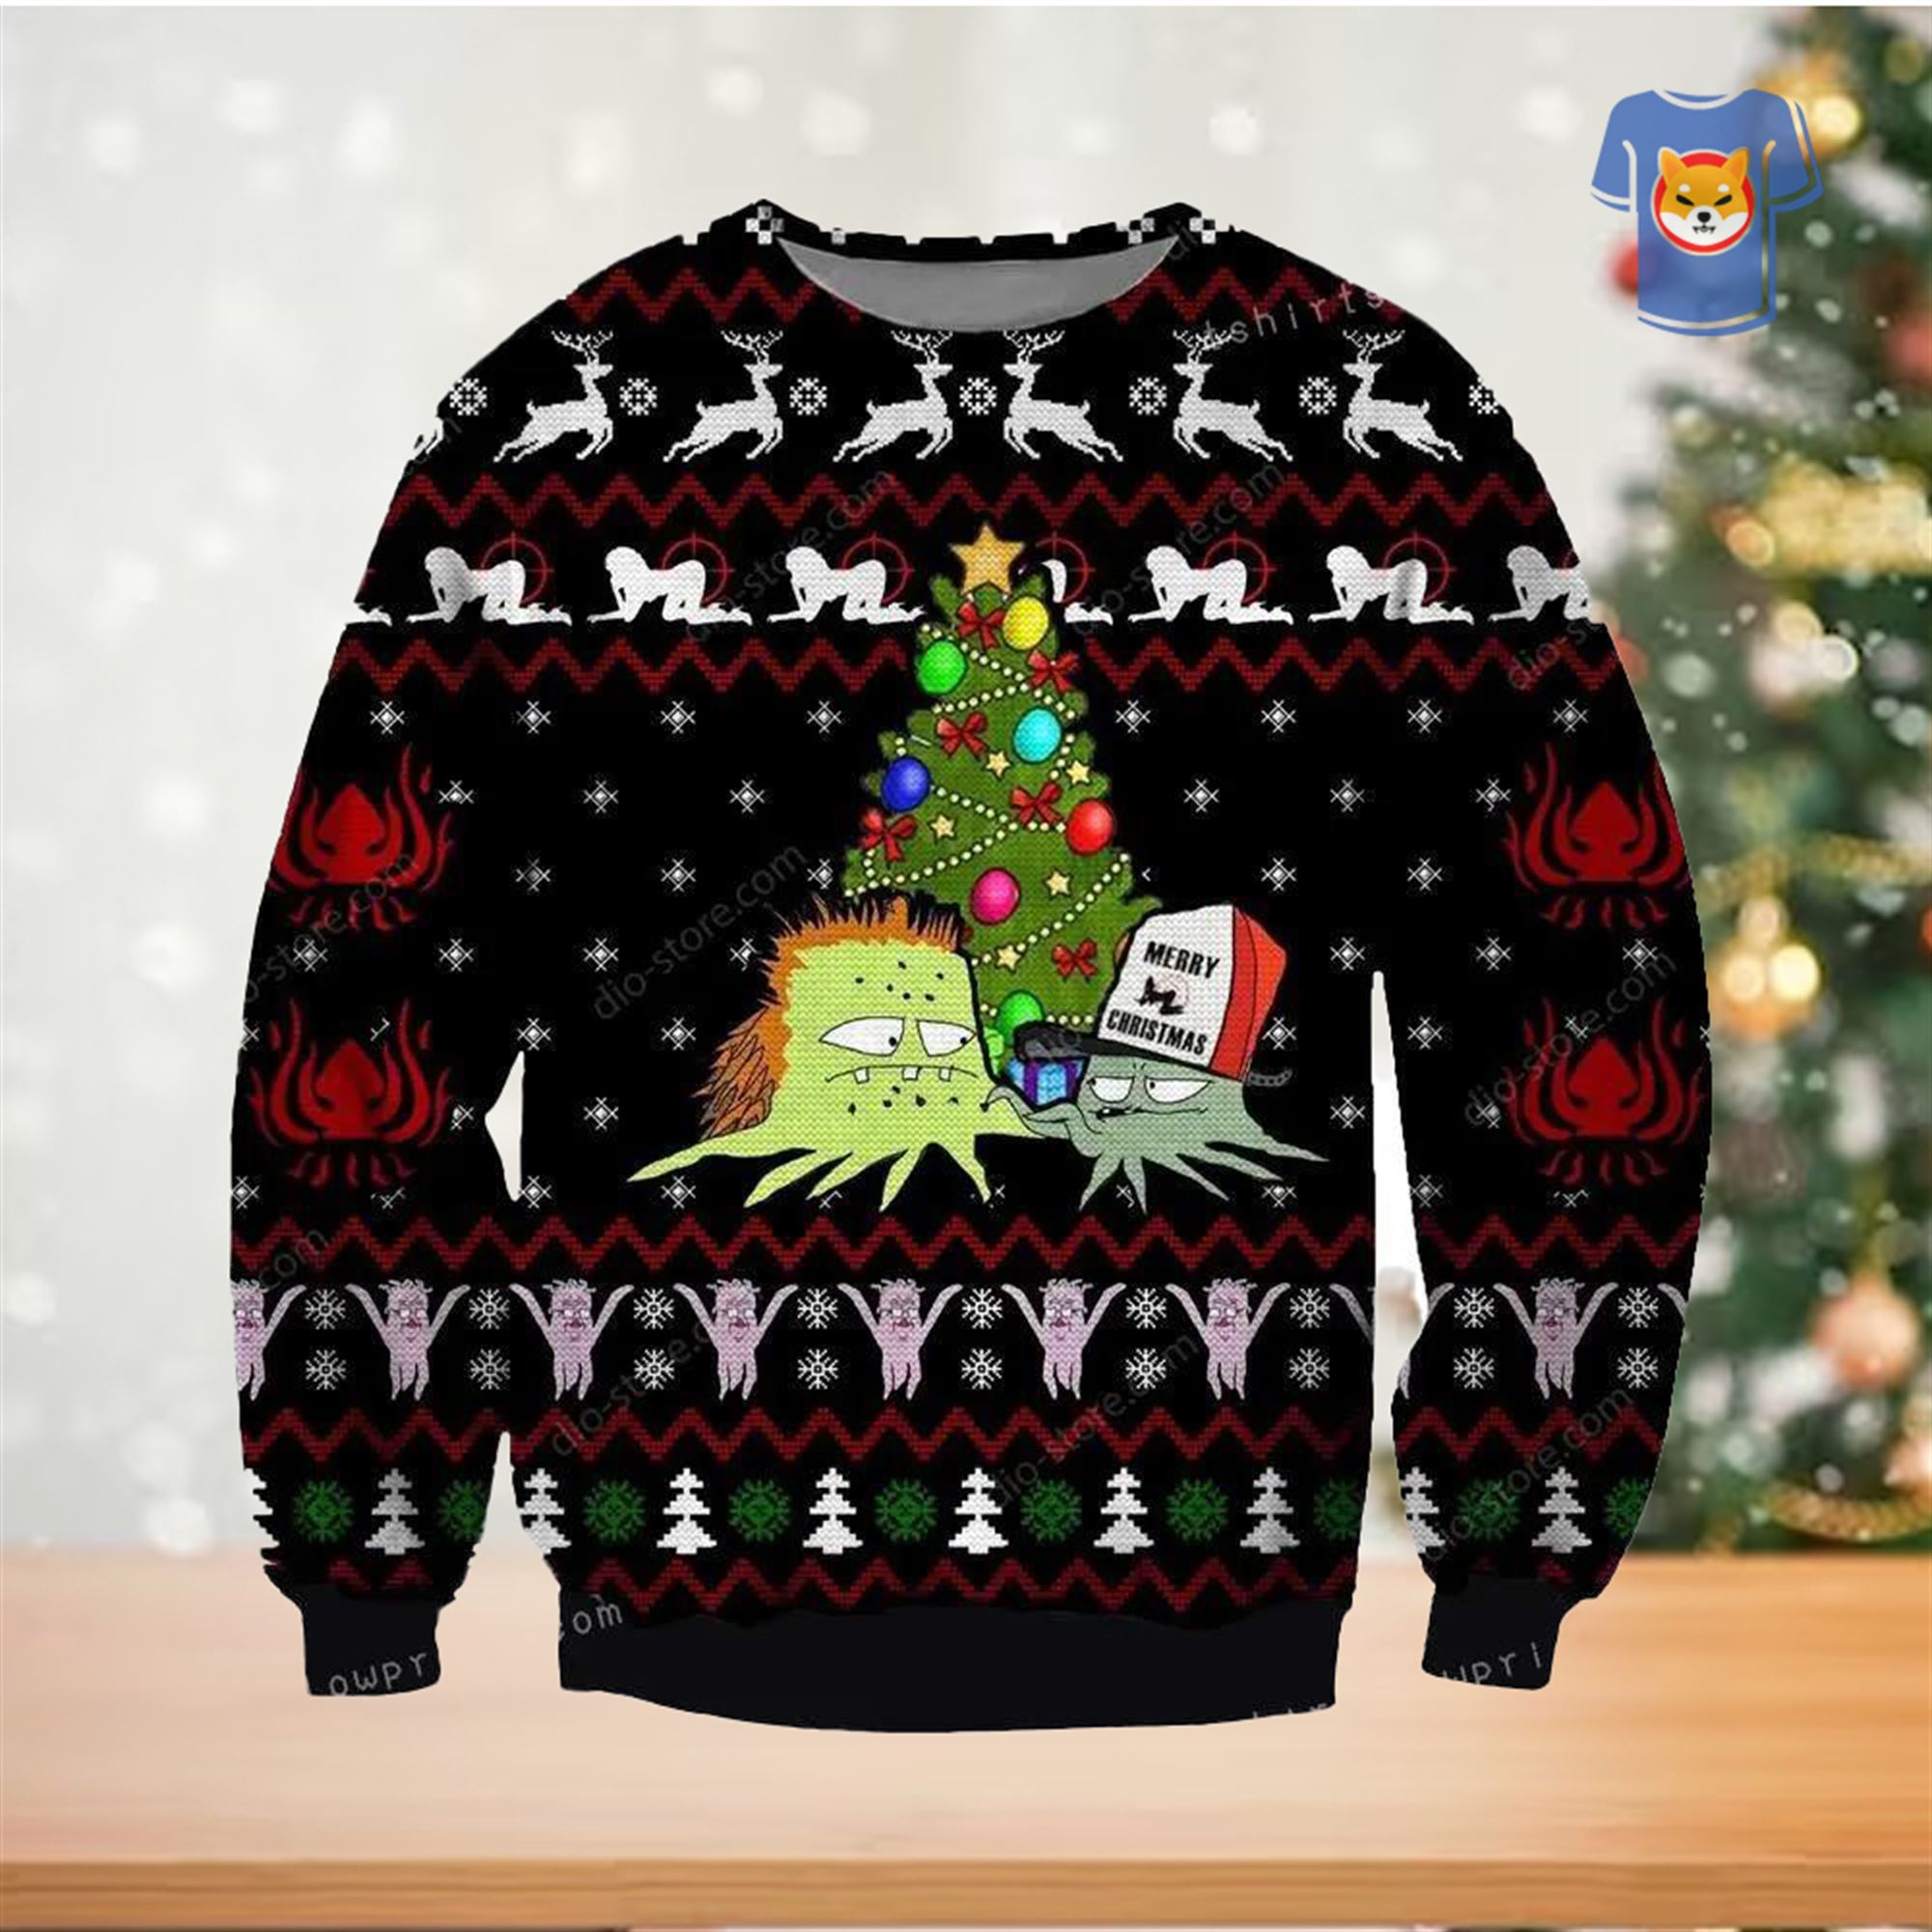 Squidbillies Ugly Christmas Sweater Christmas Party 